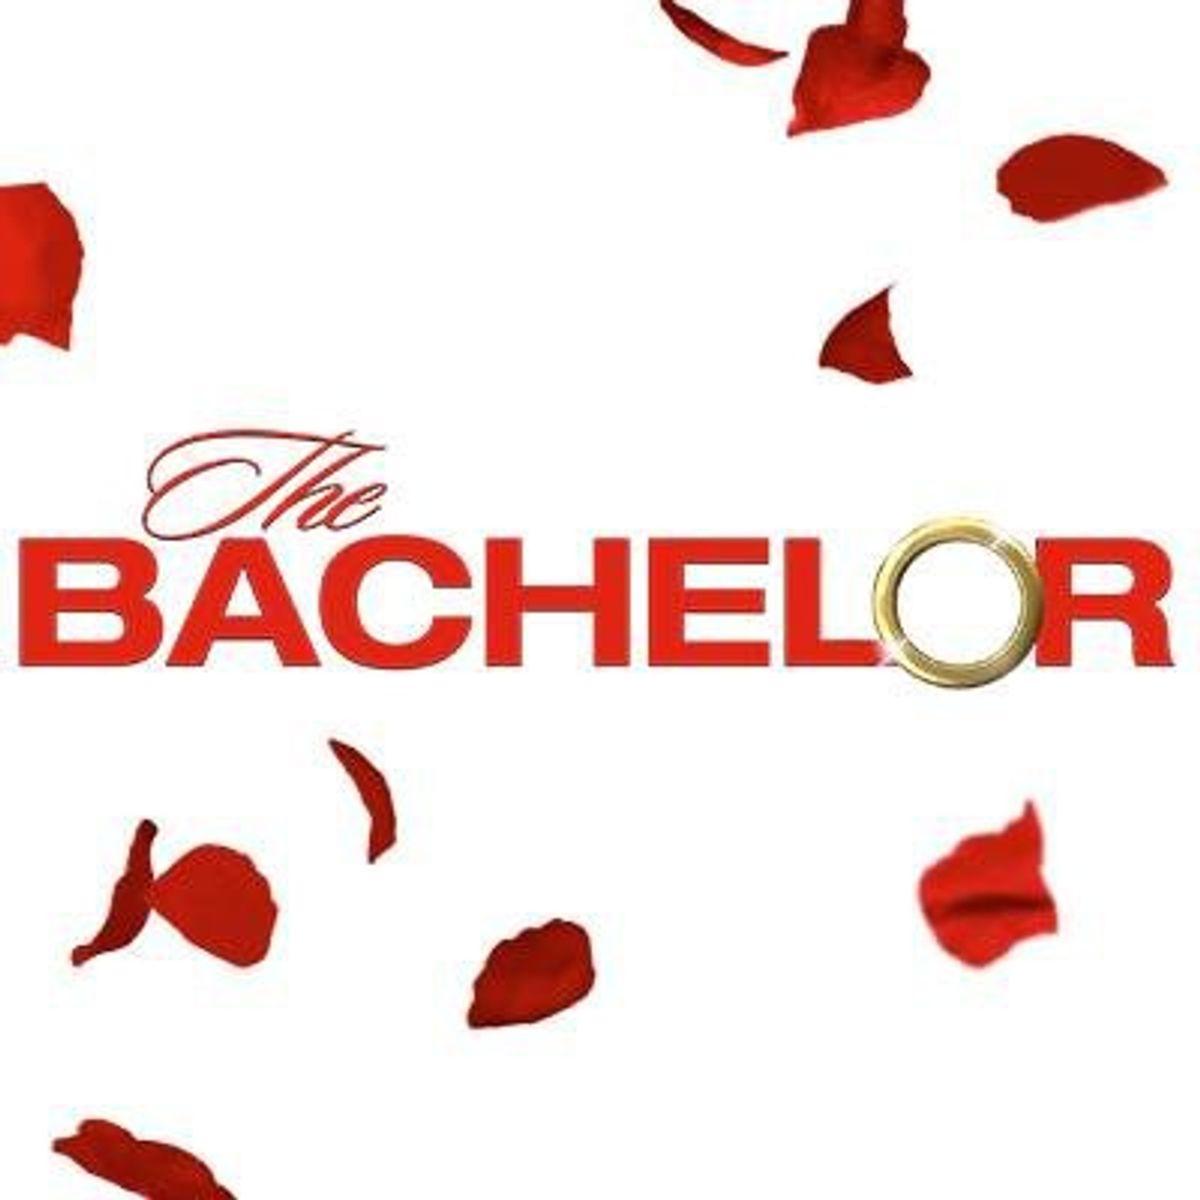 What I Learned From Watching 'The Bachelor' With My Mom